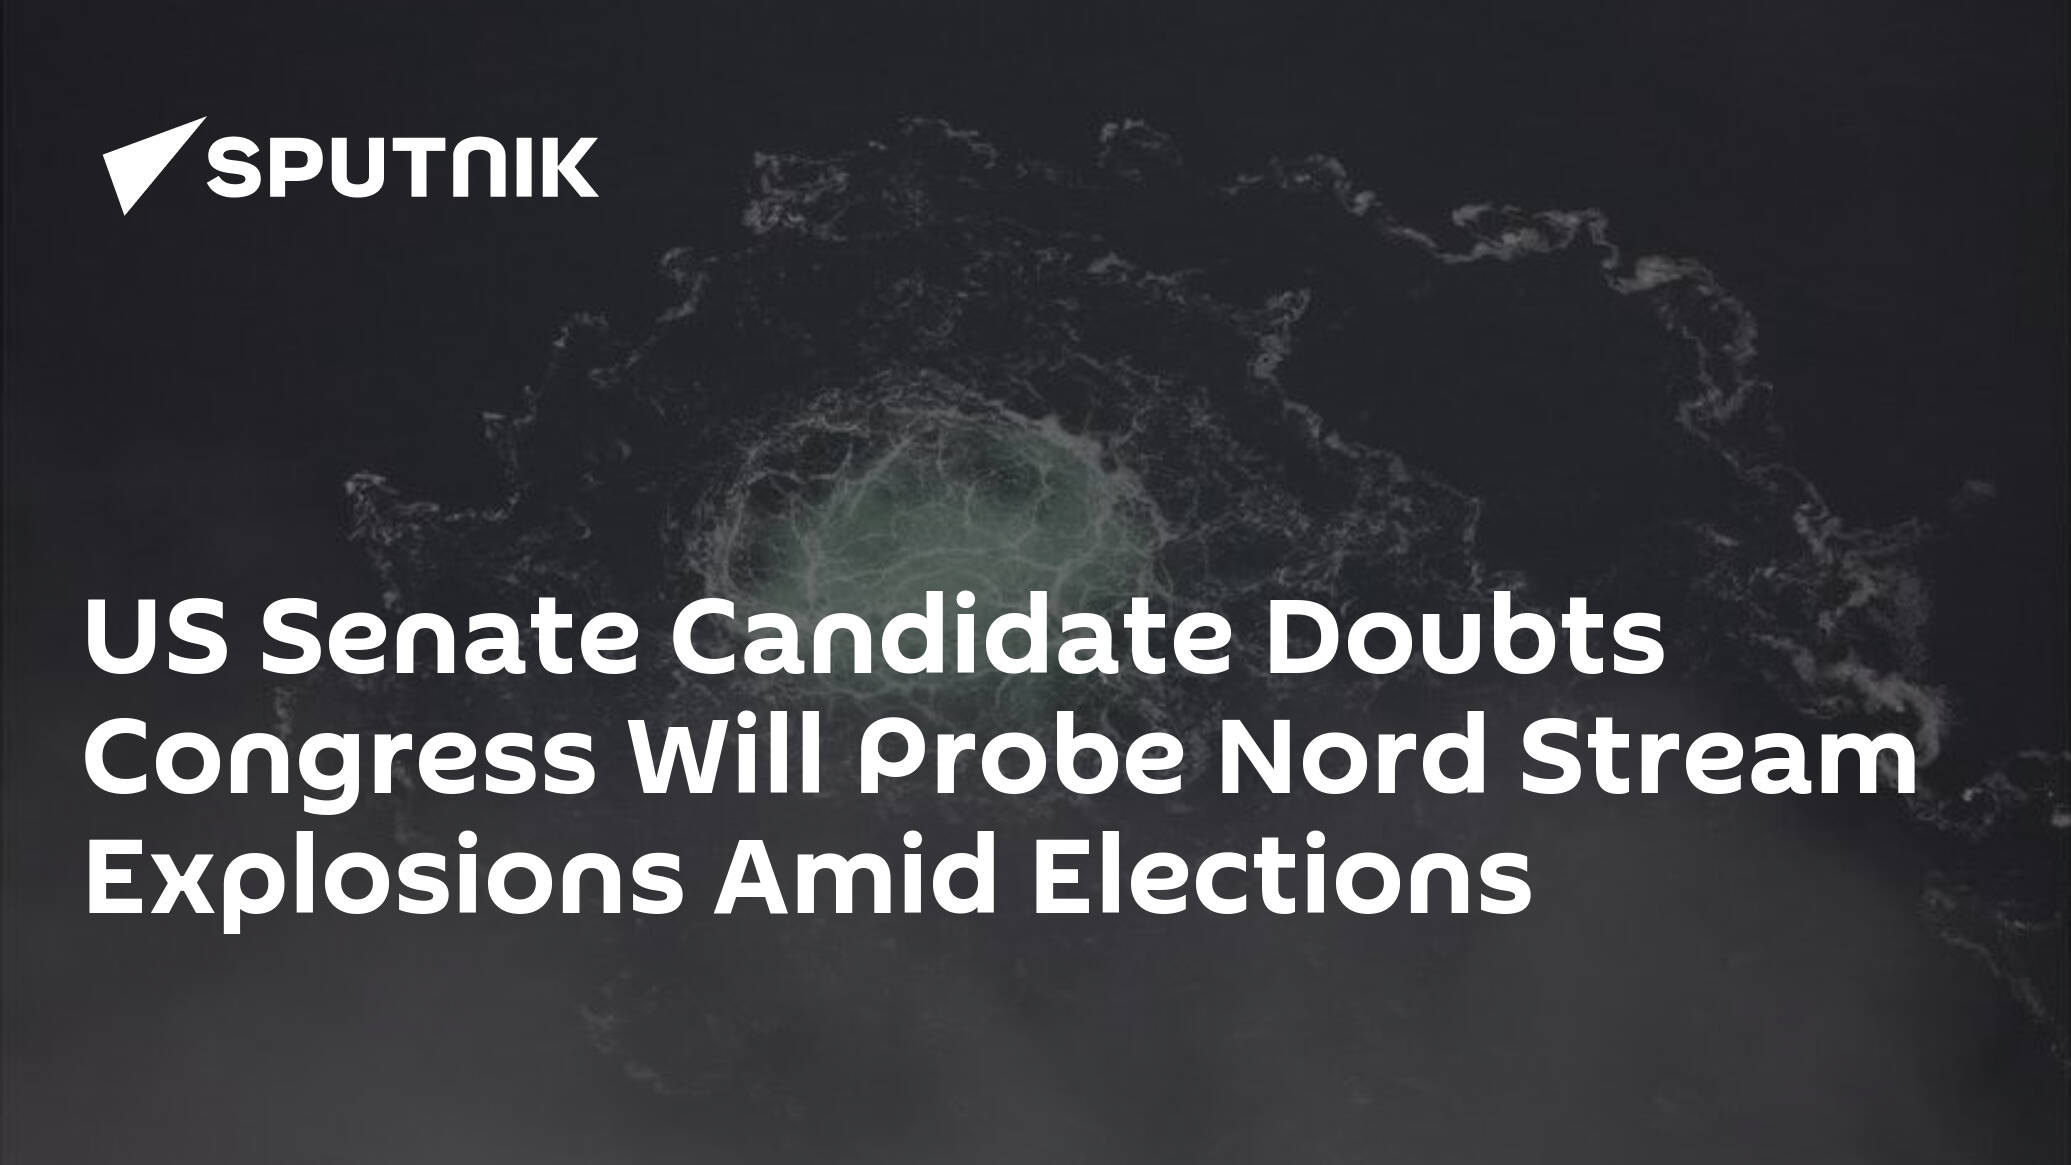 US Senate Candidate Doubts Congress Will Probe Nord Stream Explosions Amid Elections